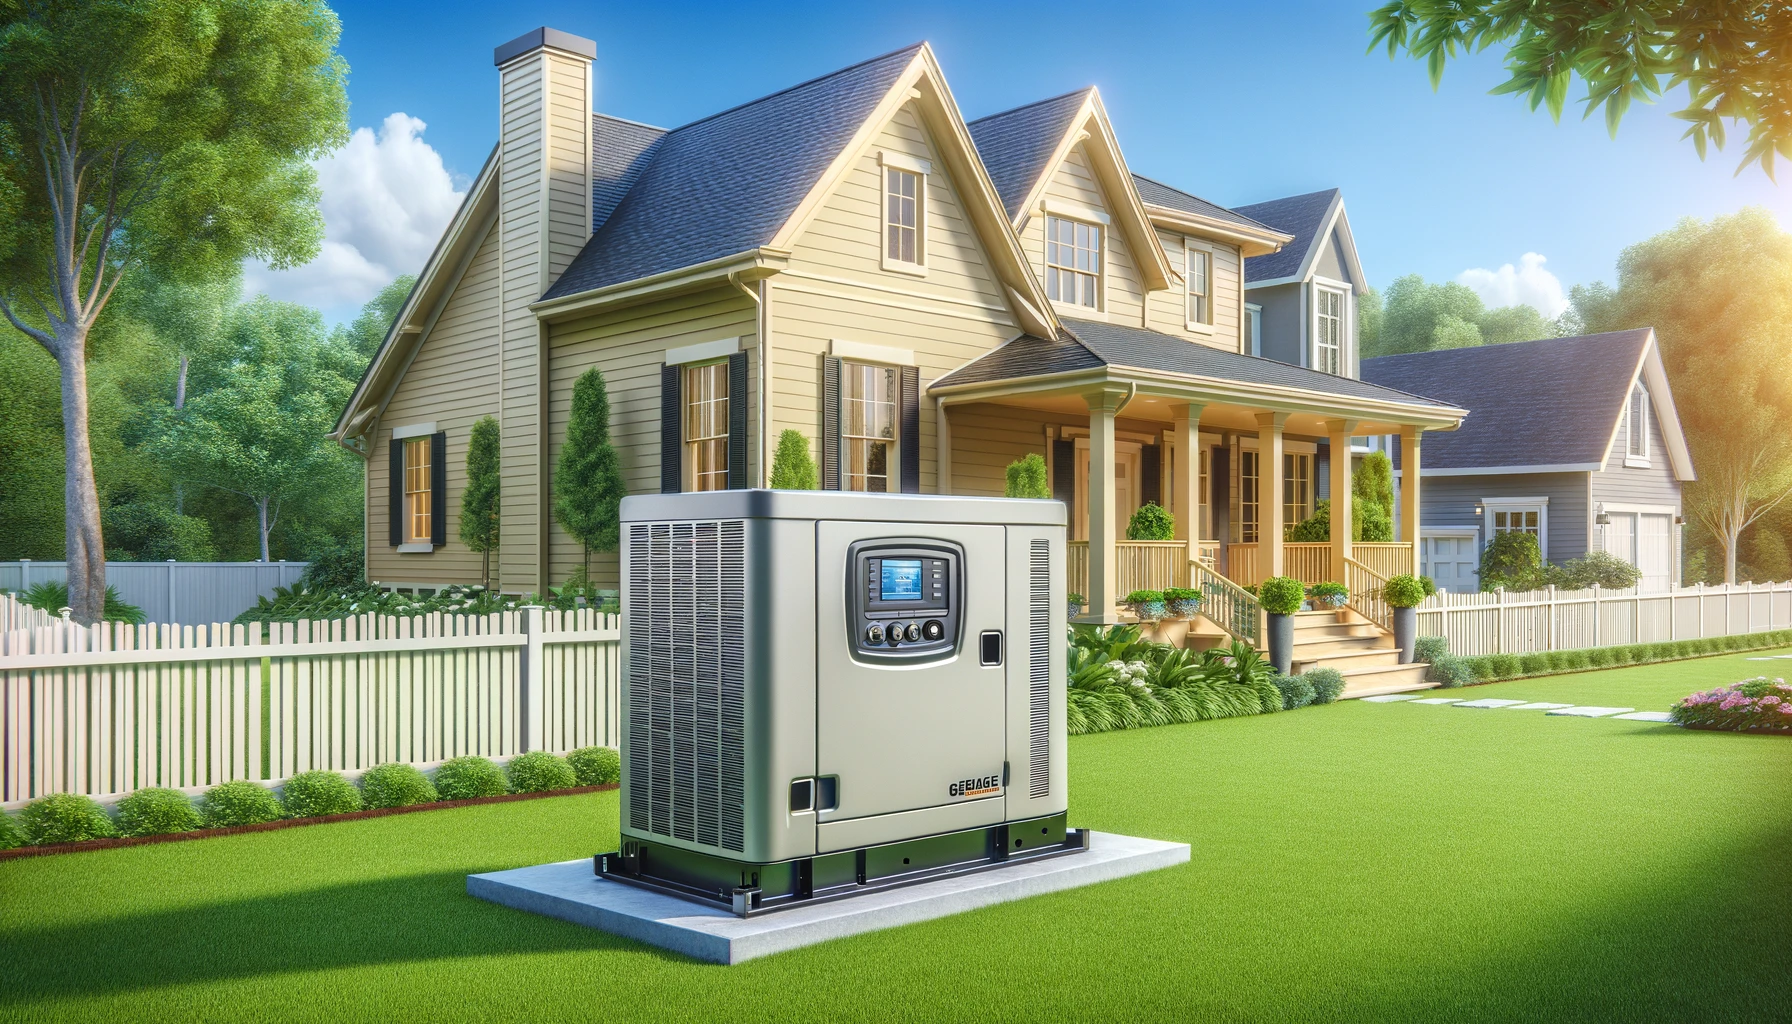 What Are the Advantages of Owning a Whole-home Standby Generator?